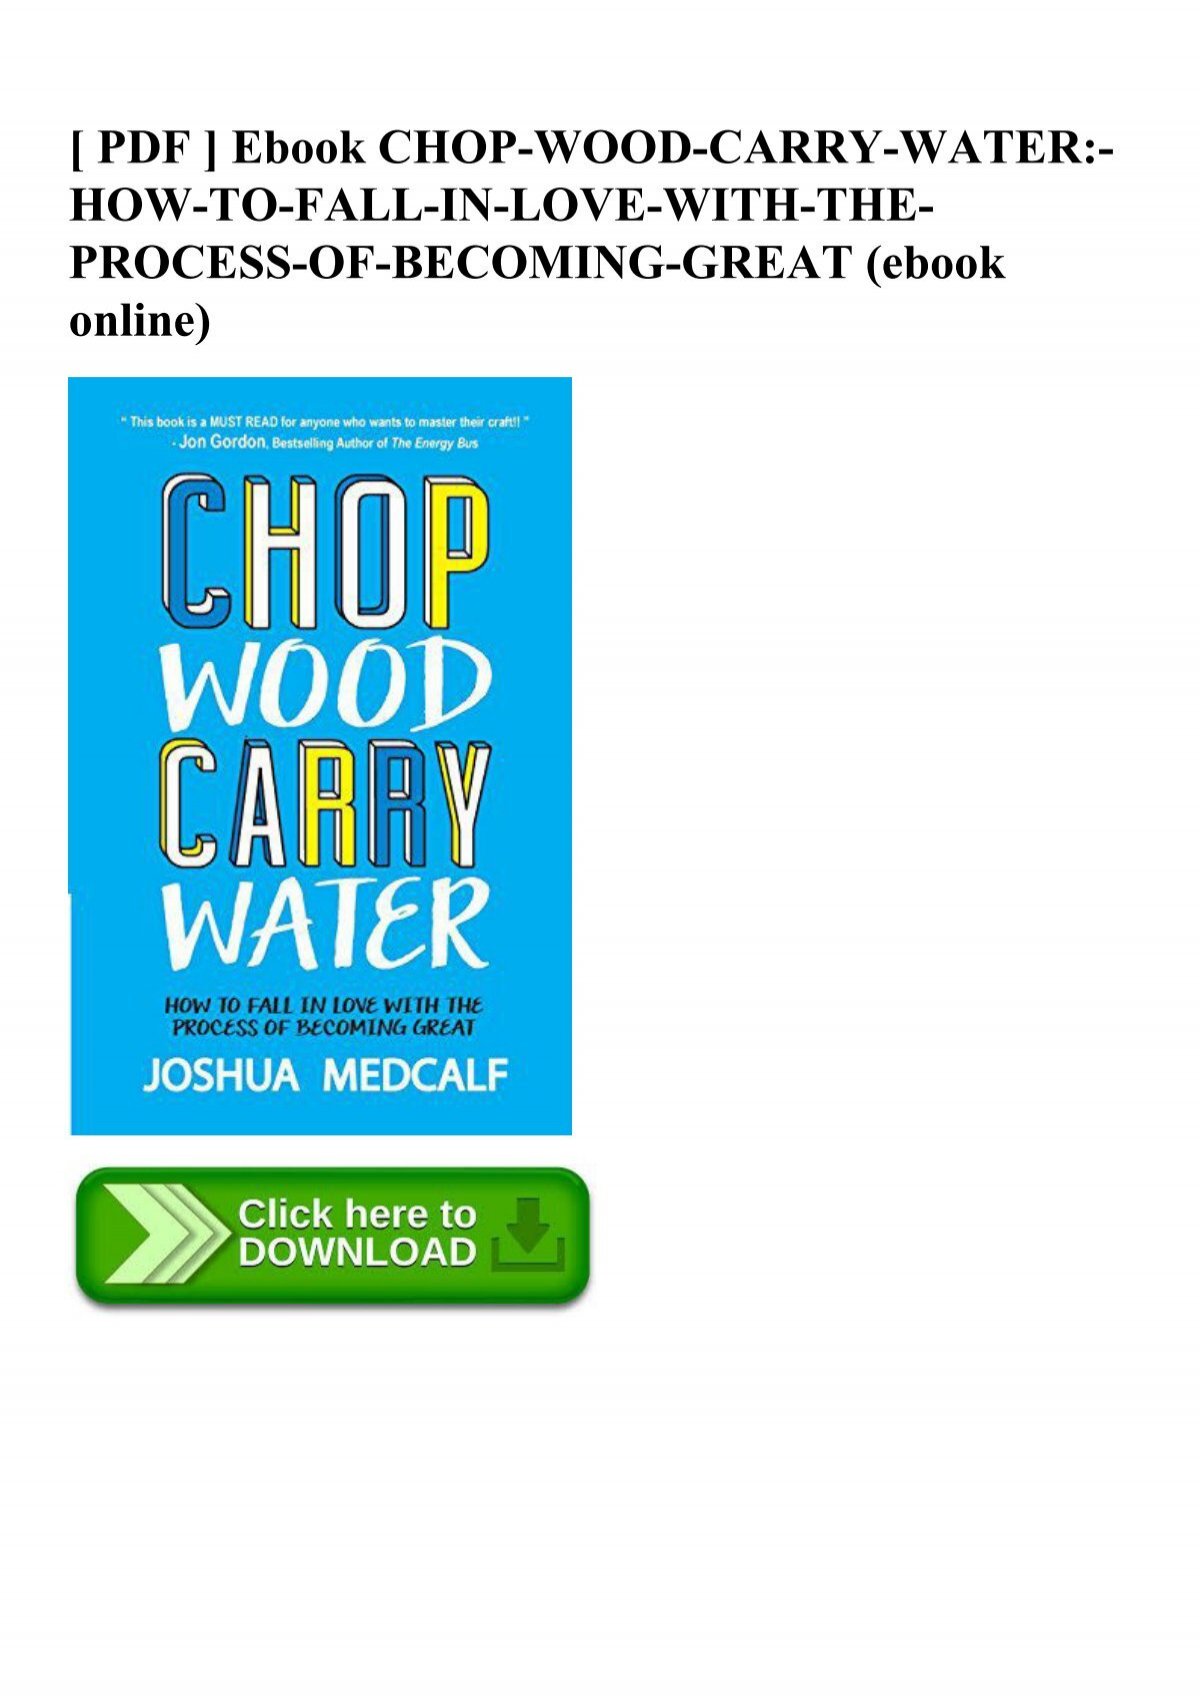 Pdf Ebook Chop Wood Carry Water How To Fall In Love With The Process Of Becoming Great Ebook On